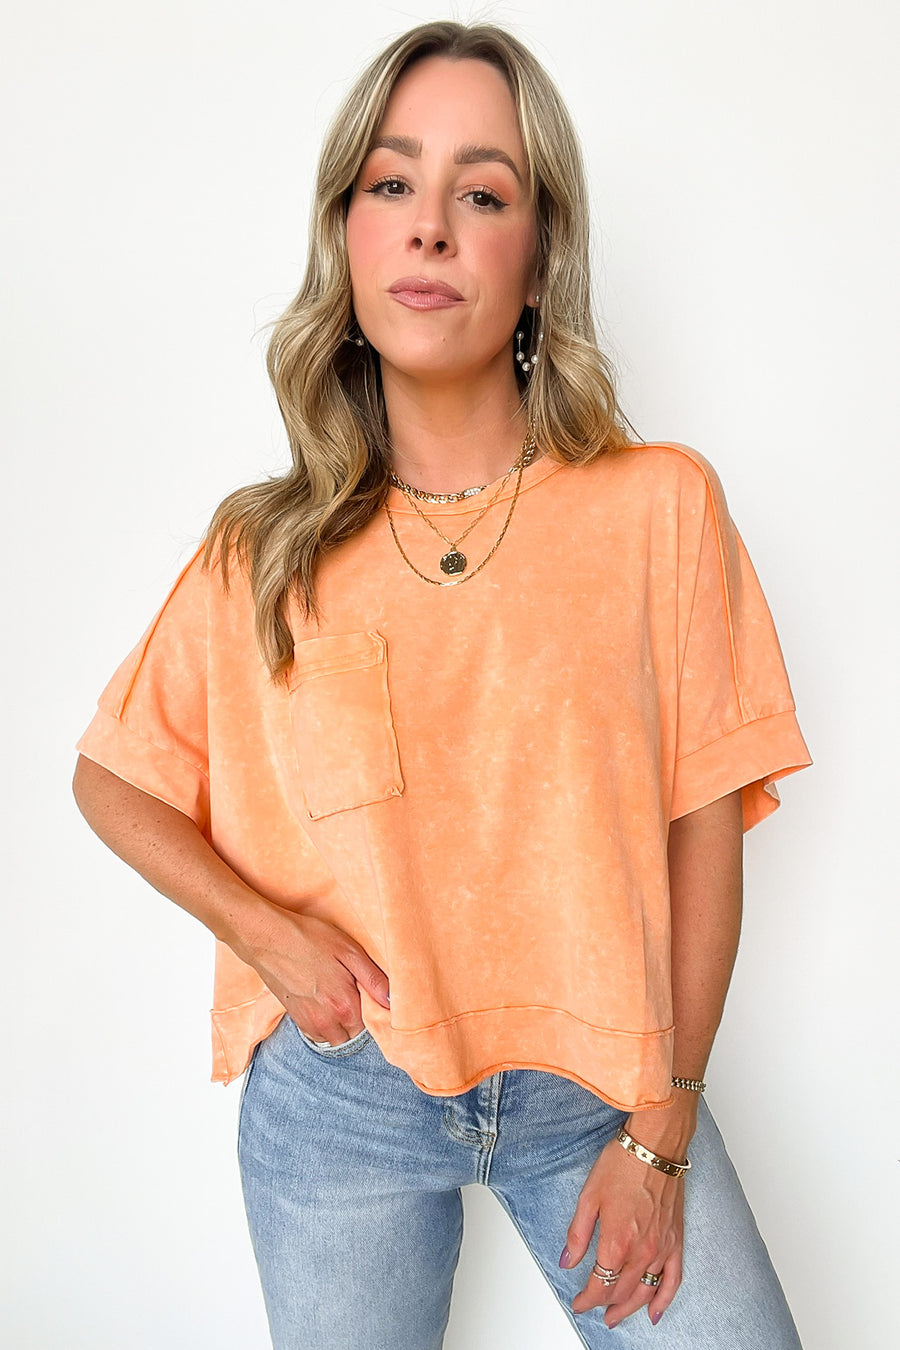 Mango / S Priscillah Mineral Wash Oversized Pocket Tee - BACK IN STOCK - Madison and Mallory